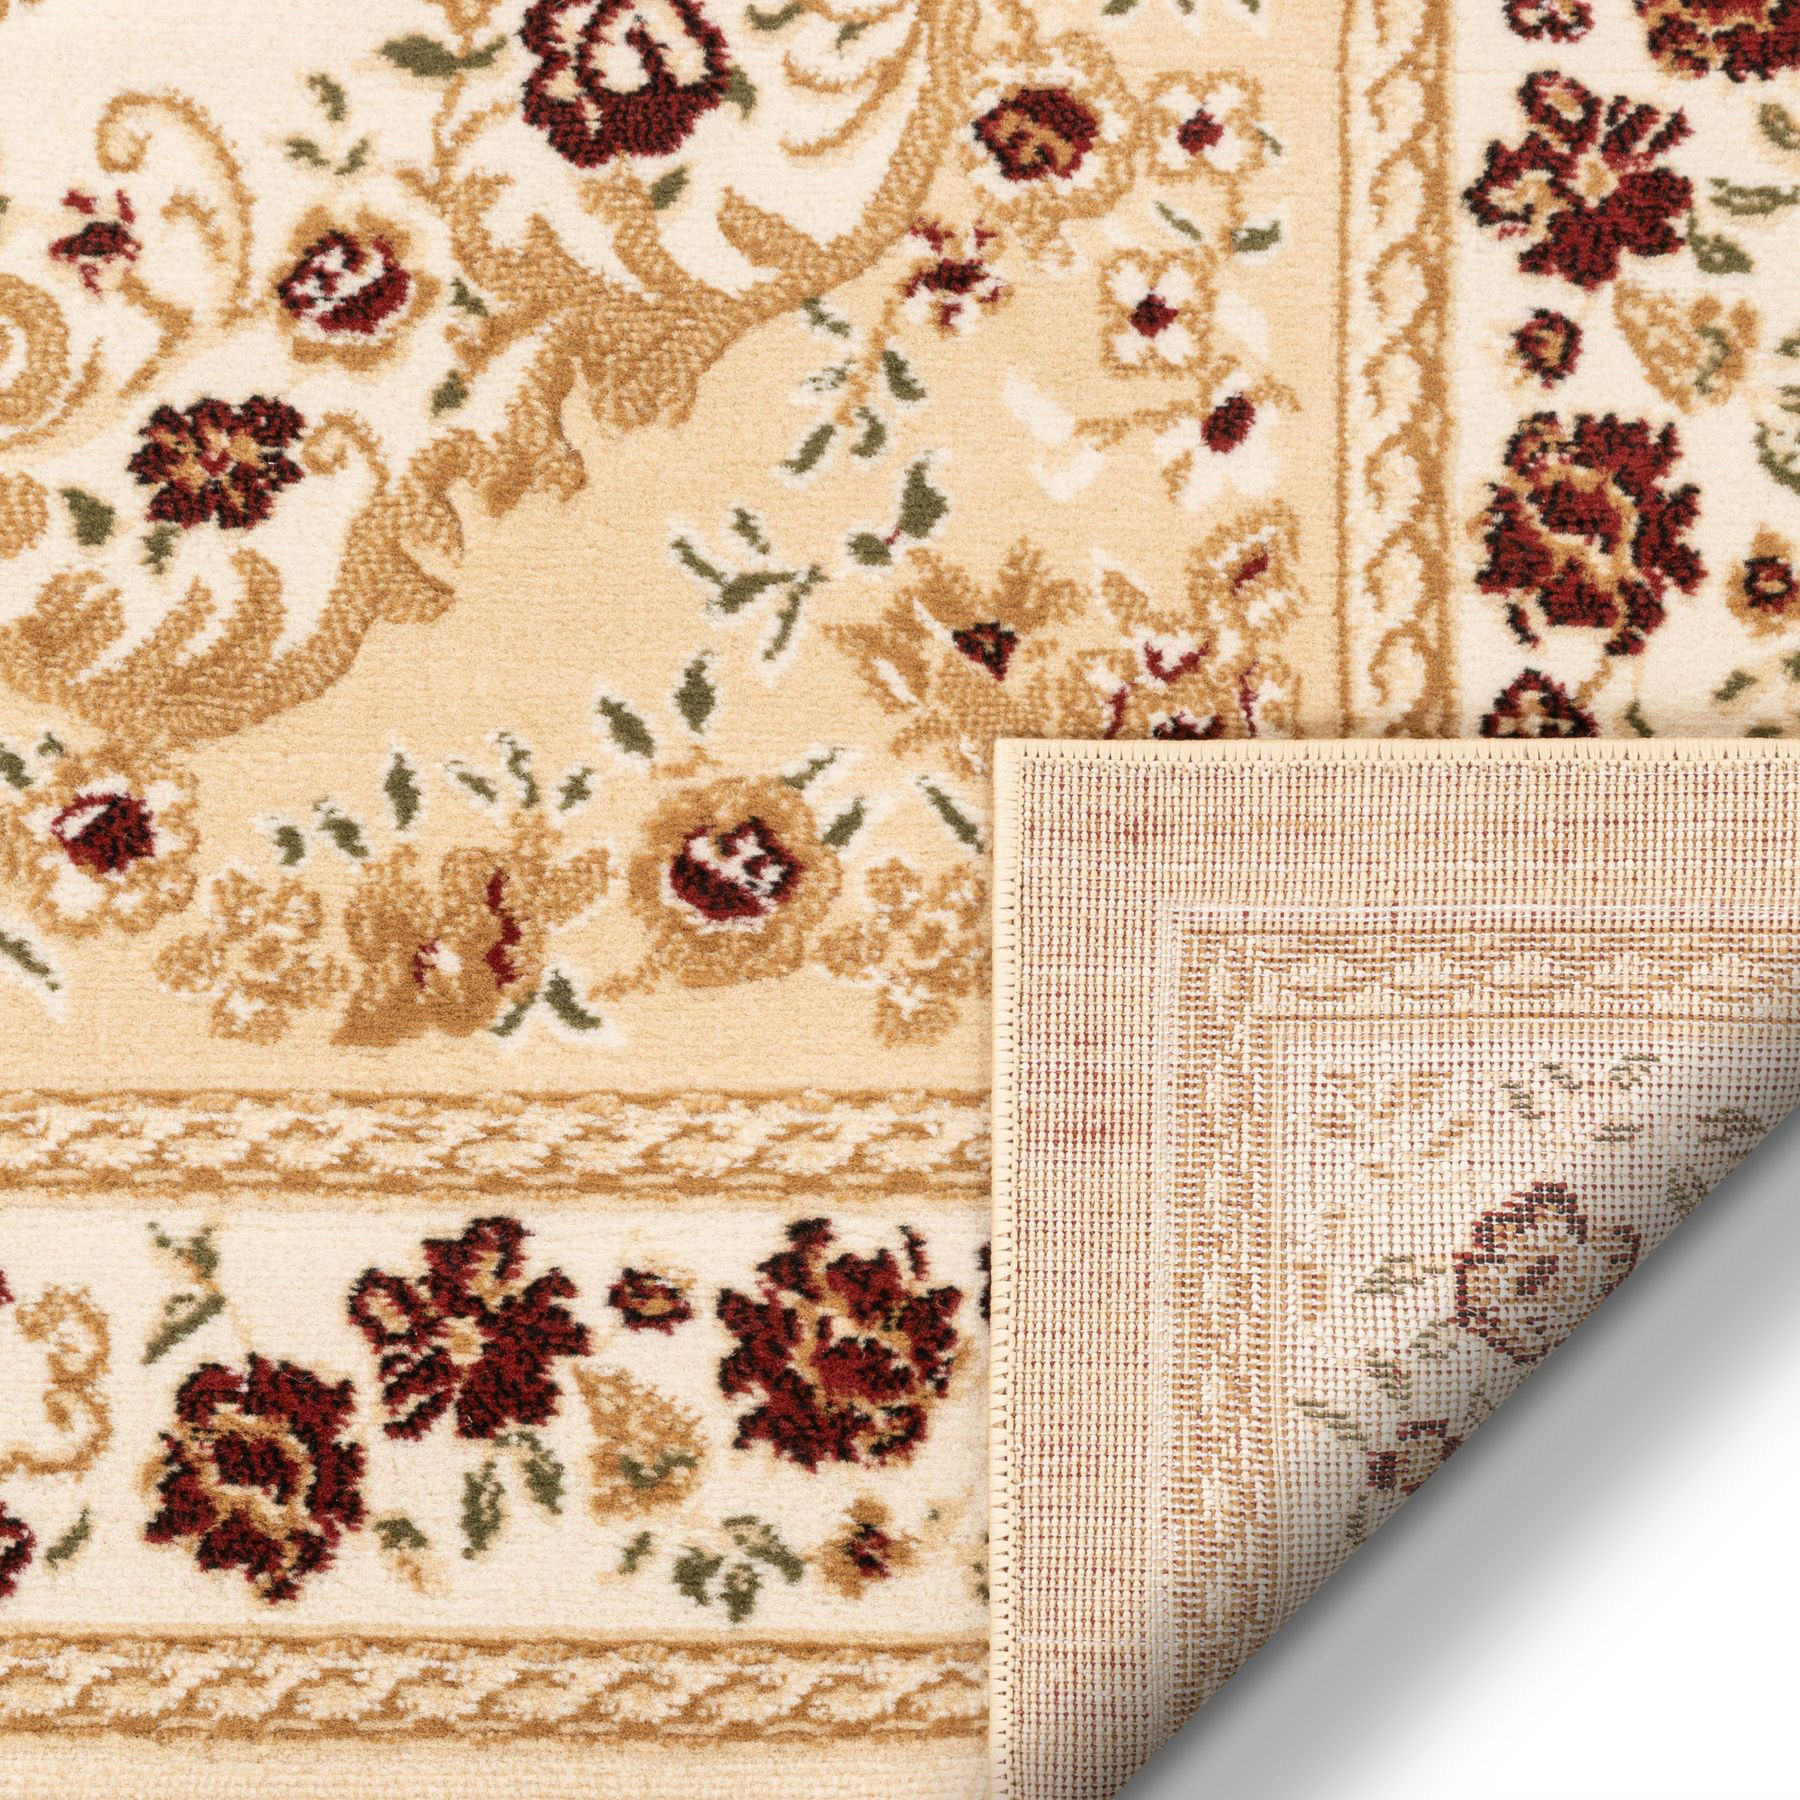 Axel Beige Traditional Floral Rug